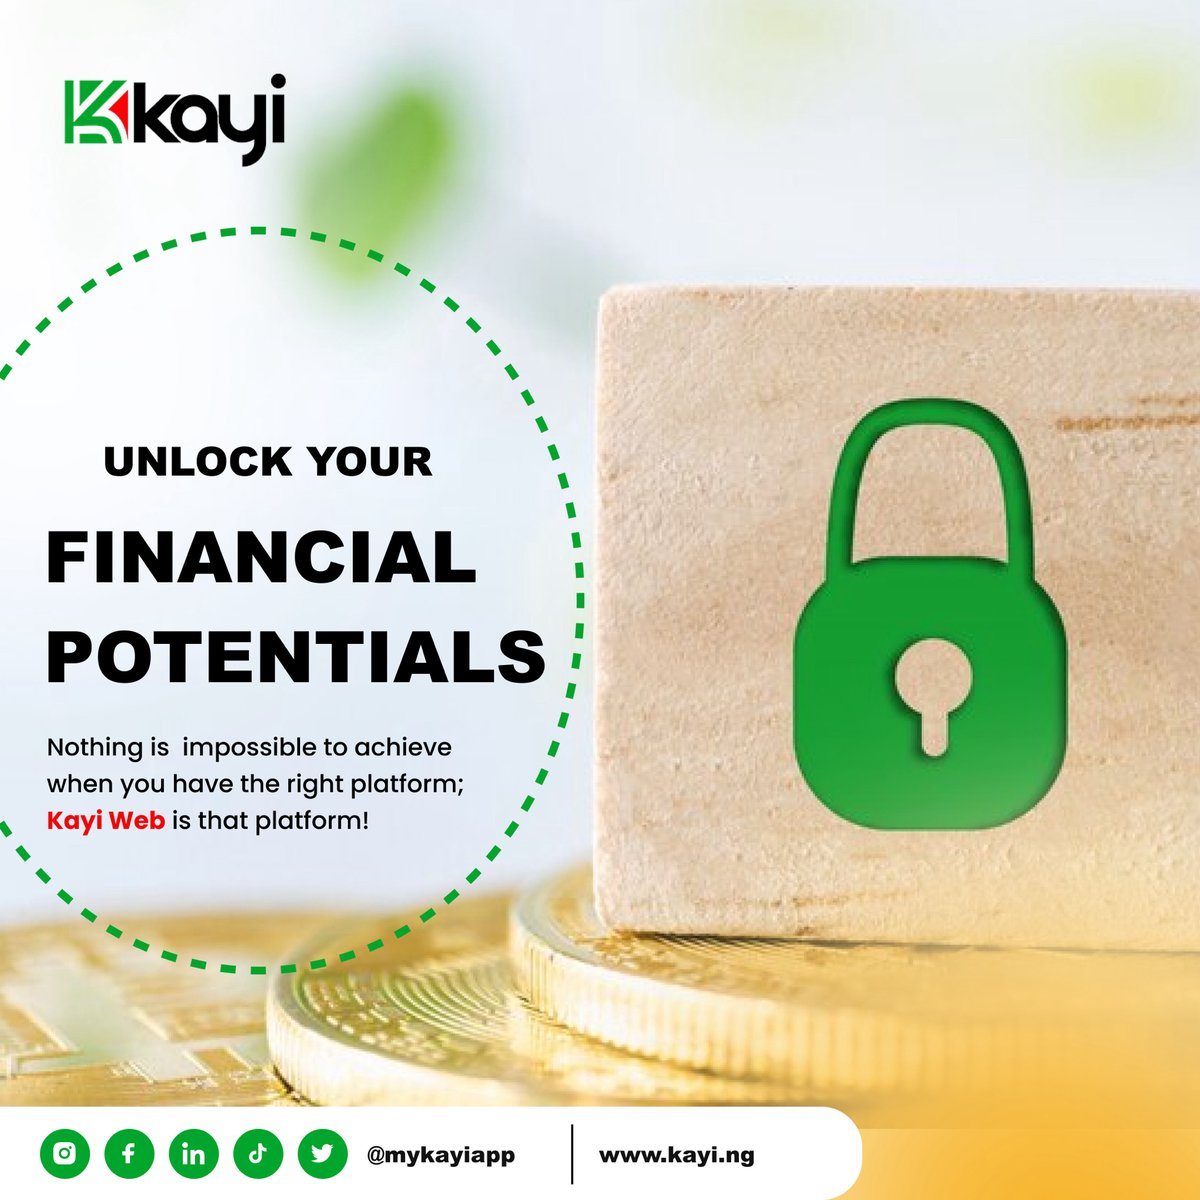 Unlock your financial potentials with Kayi!

#Mykayiapp
#Kayiway
#Digitalbanking
#safeandsecure
#guaranteedsafety